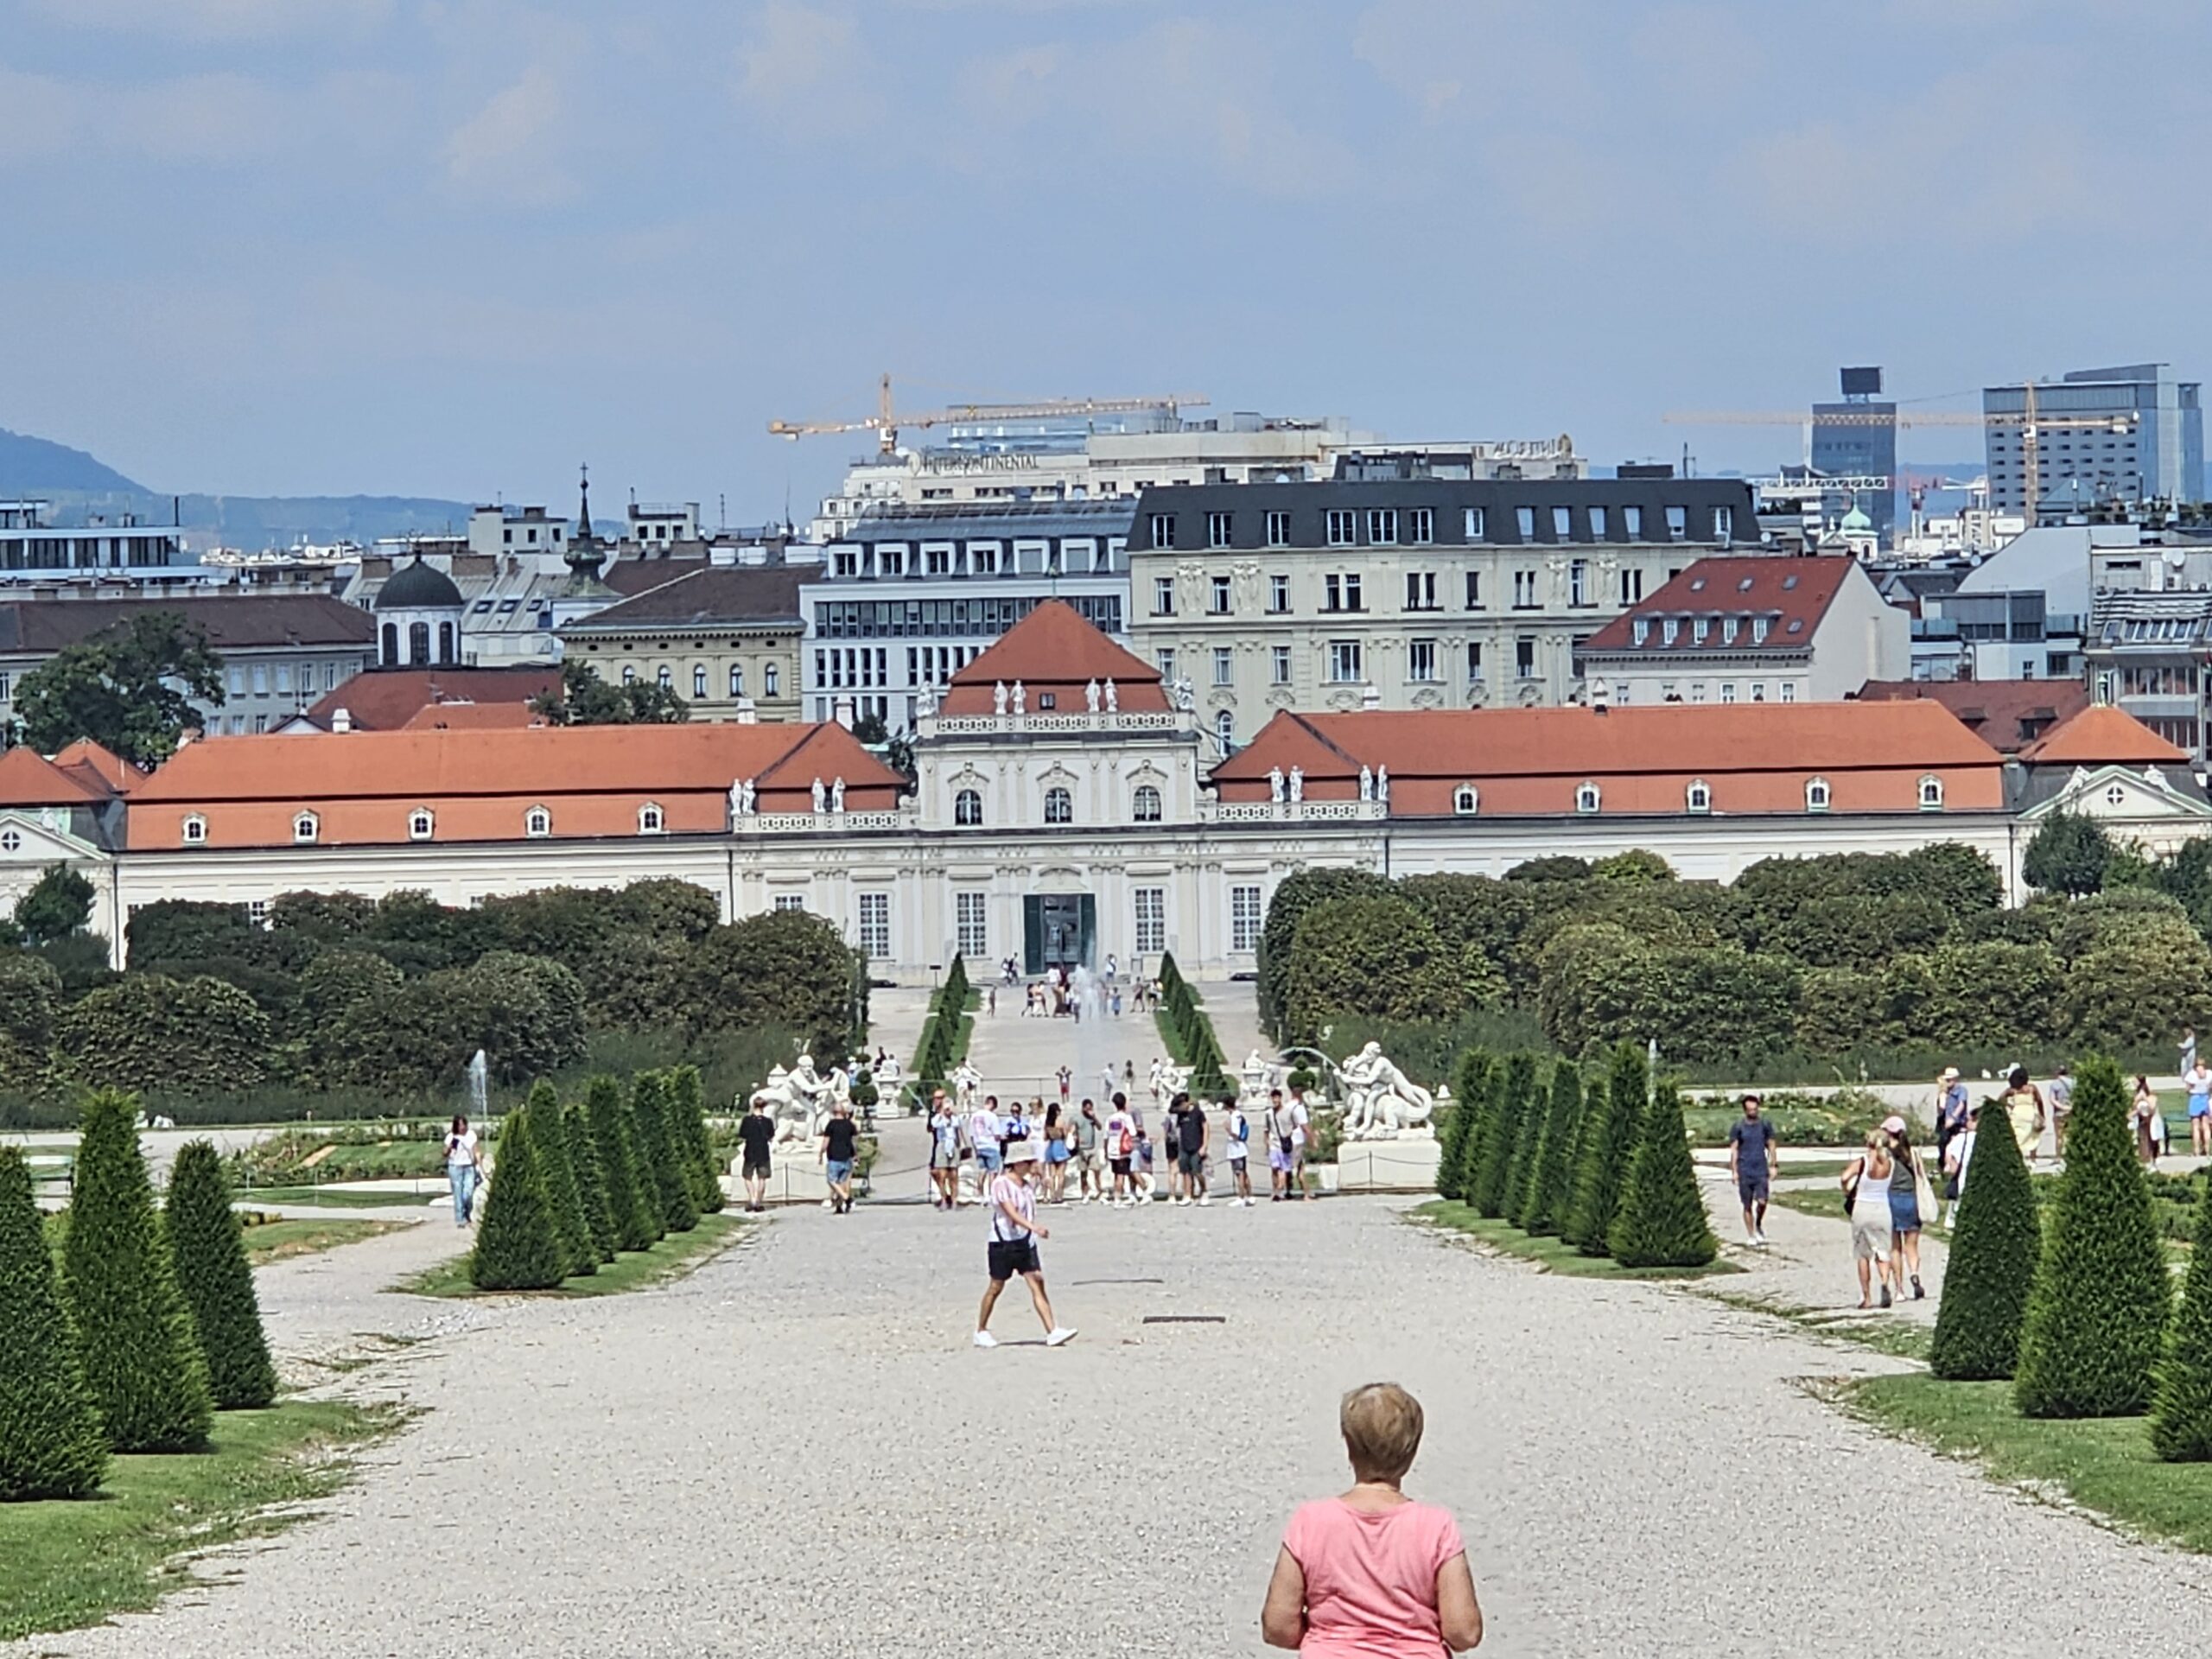 Patheway down to Lower Belevedere Palace from Upper Belvedere, Vienna. Image: 360onhistory.com